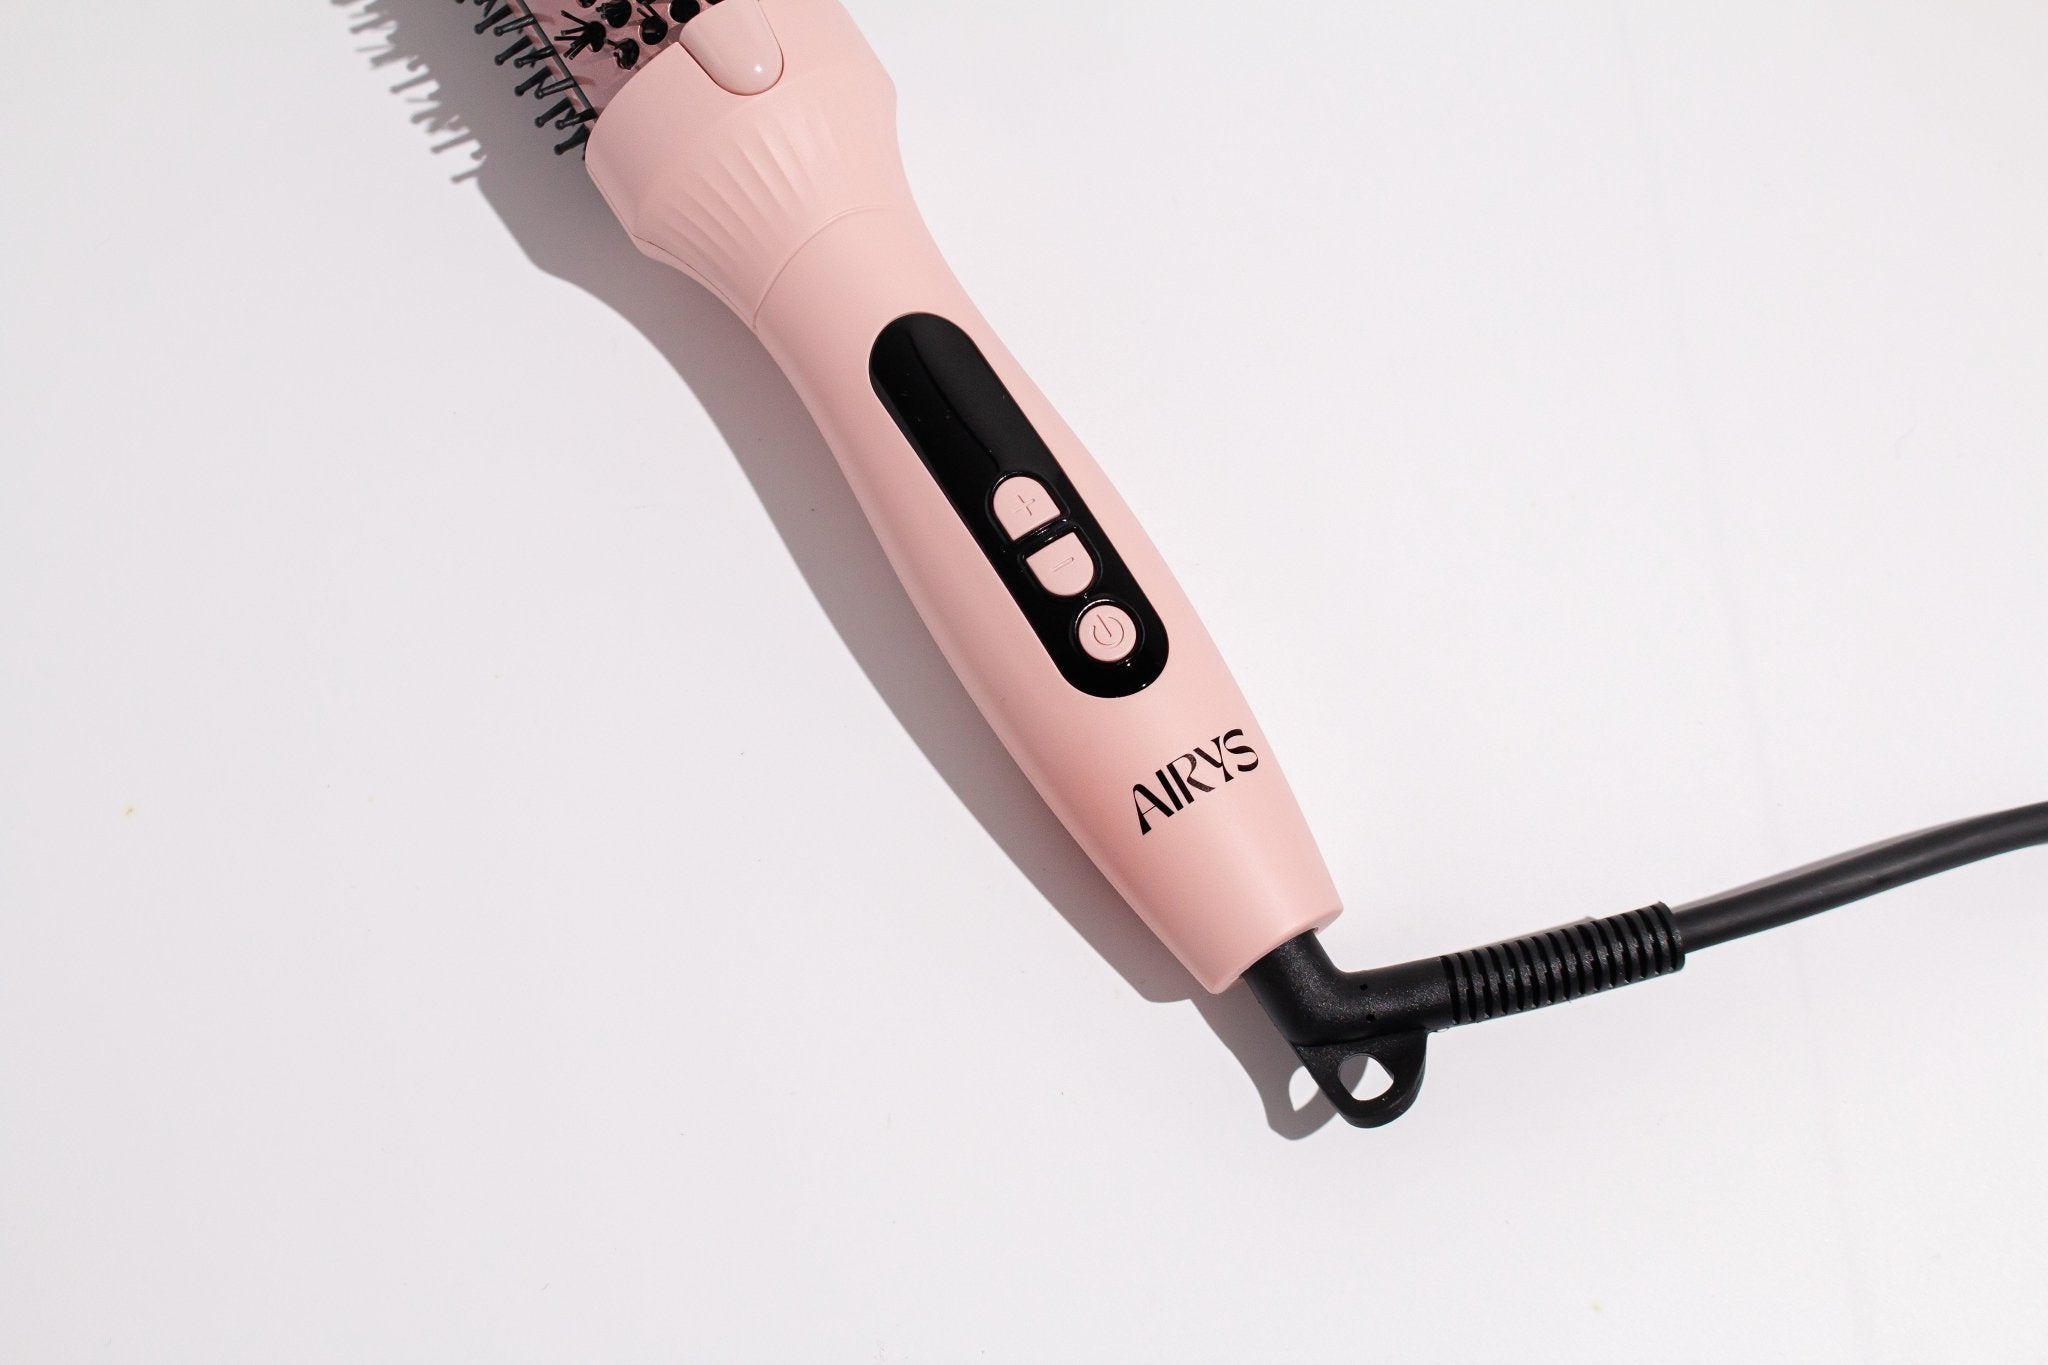 Airys Bouncy Blowdry Brush - Airys Hair - Wave Babe - Airys Hair - 5 in 1 hair styler - 5 in 1 styler - wavy talk - hair curler - curling tong - thermal brush - bouncy blowdry brush - mermaid waver - beach wave - interchangeable head - hair styling attachments - curling wand - blowout brush - amika brush - air wrap - heated brush - heated round brush - blowdry brush - thermal brush - blowout brush  